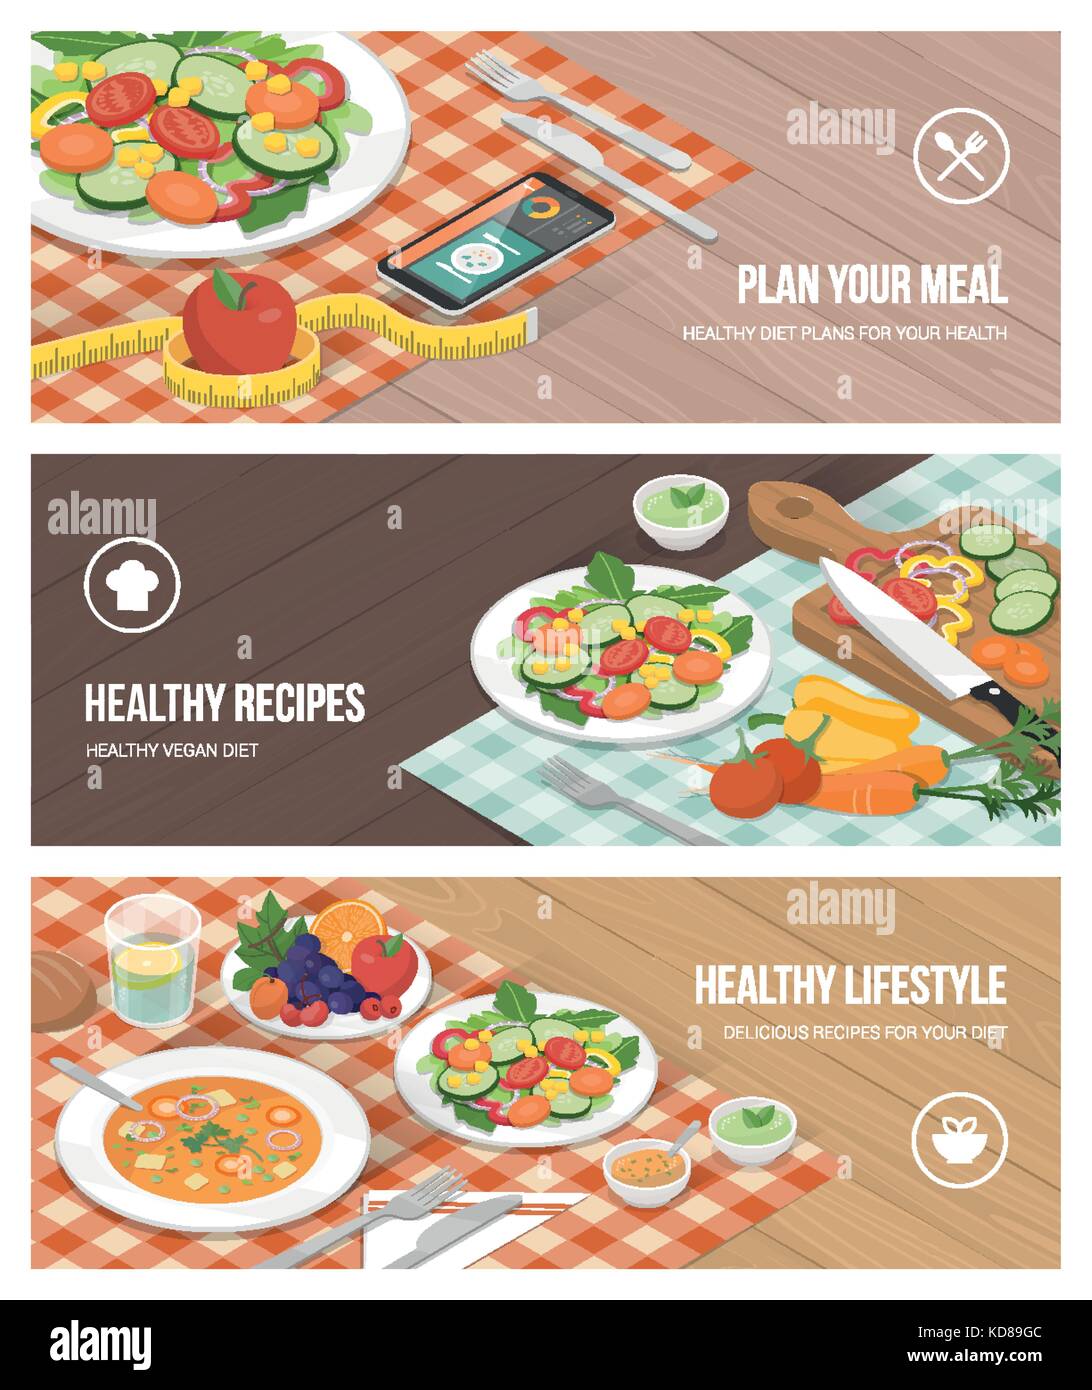 Healthy vegan food and dieting concept: food preparation, diet planning app and lunch table Stock Vector